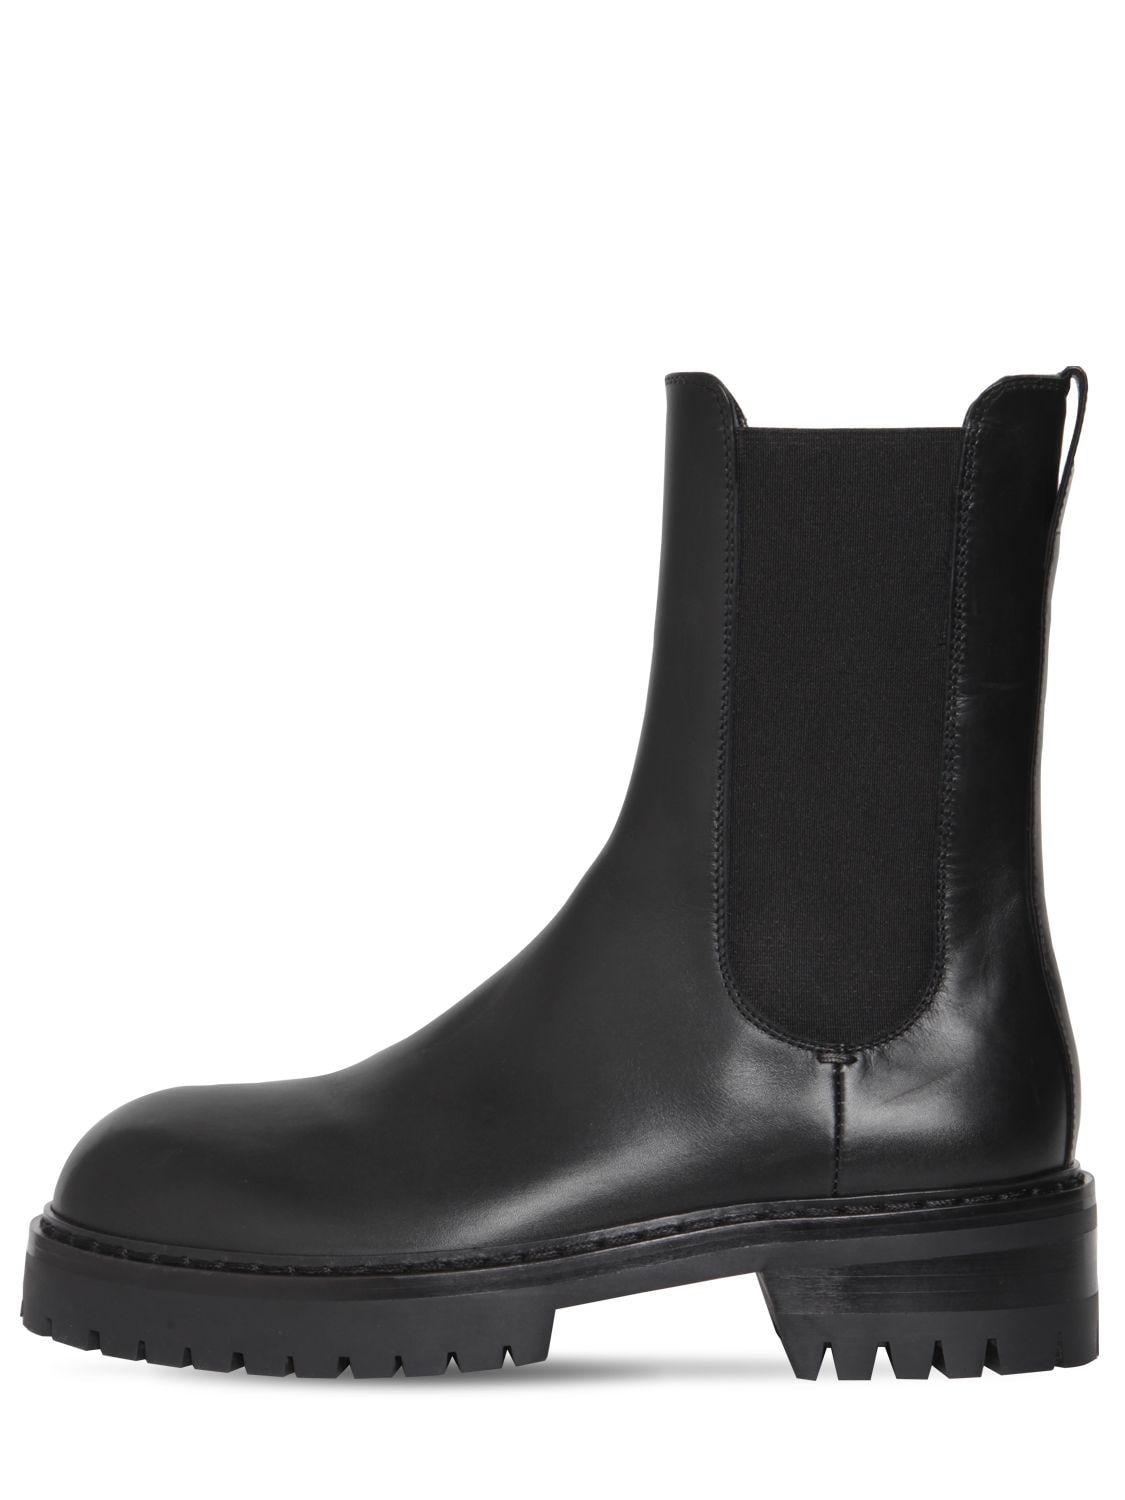 Ann Demeulemeester 25mm Wally Leather Chelsea Boots In Black | ModeSens